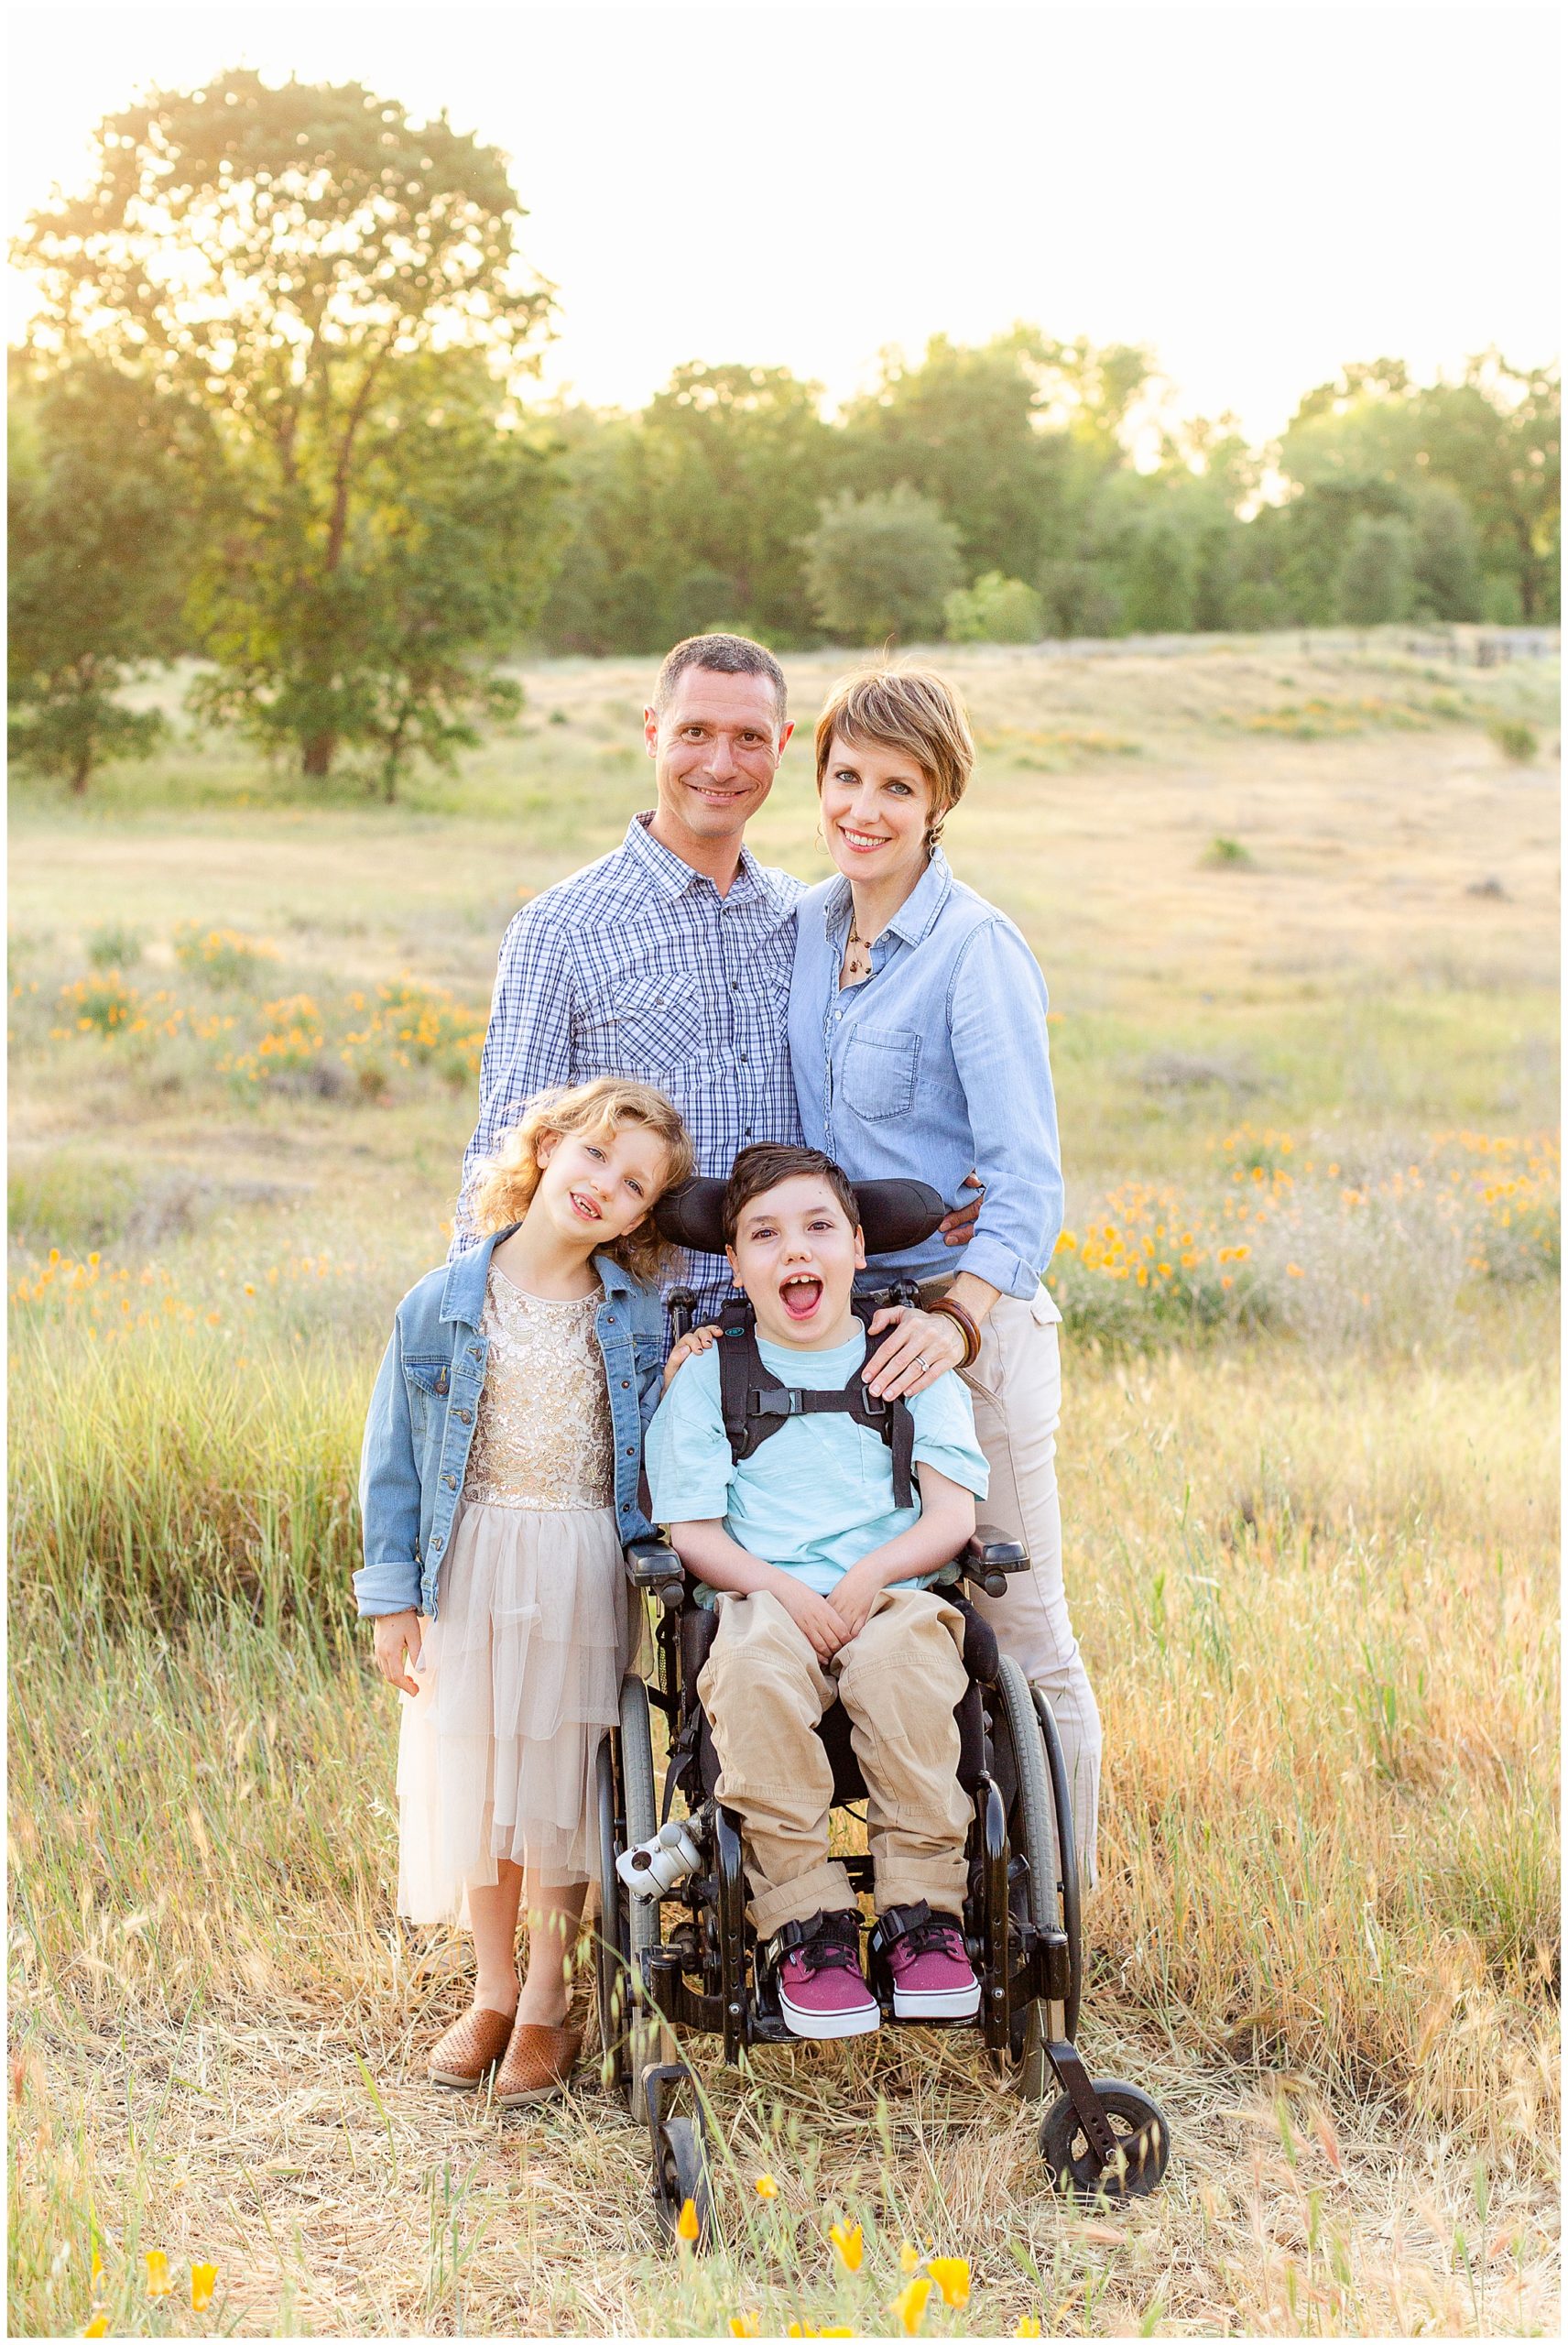 Family Session Grass Field with Wheelchair | Noelle + Quentin